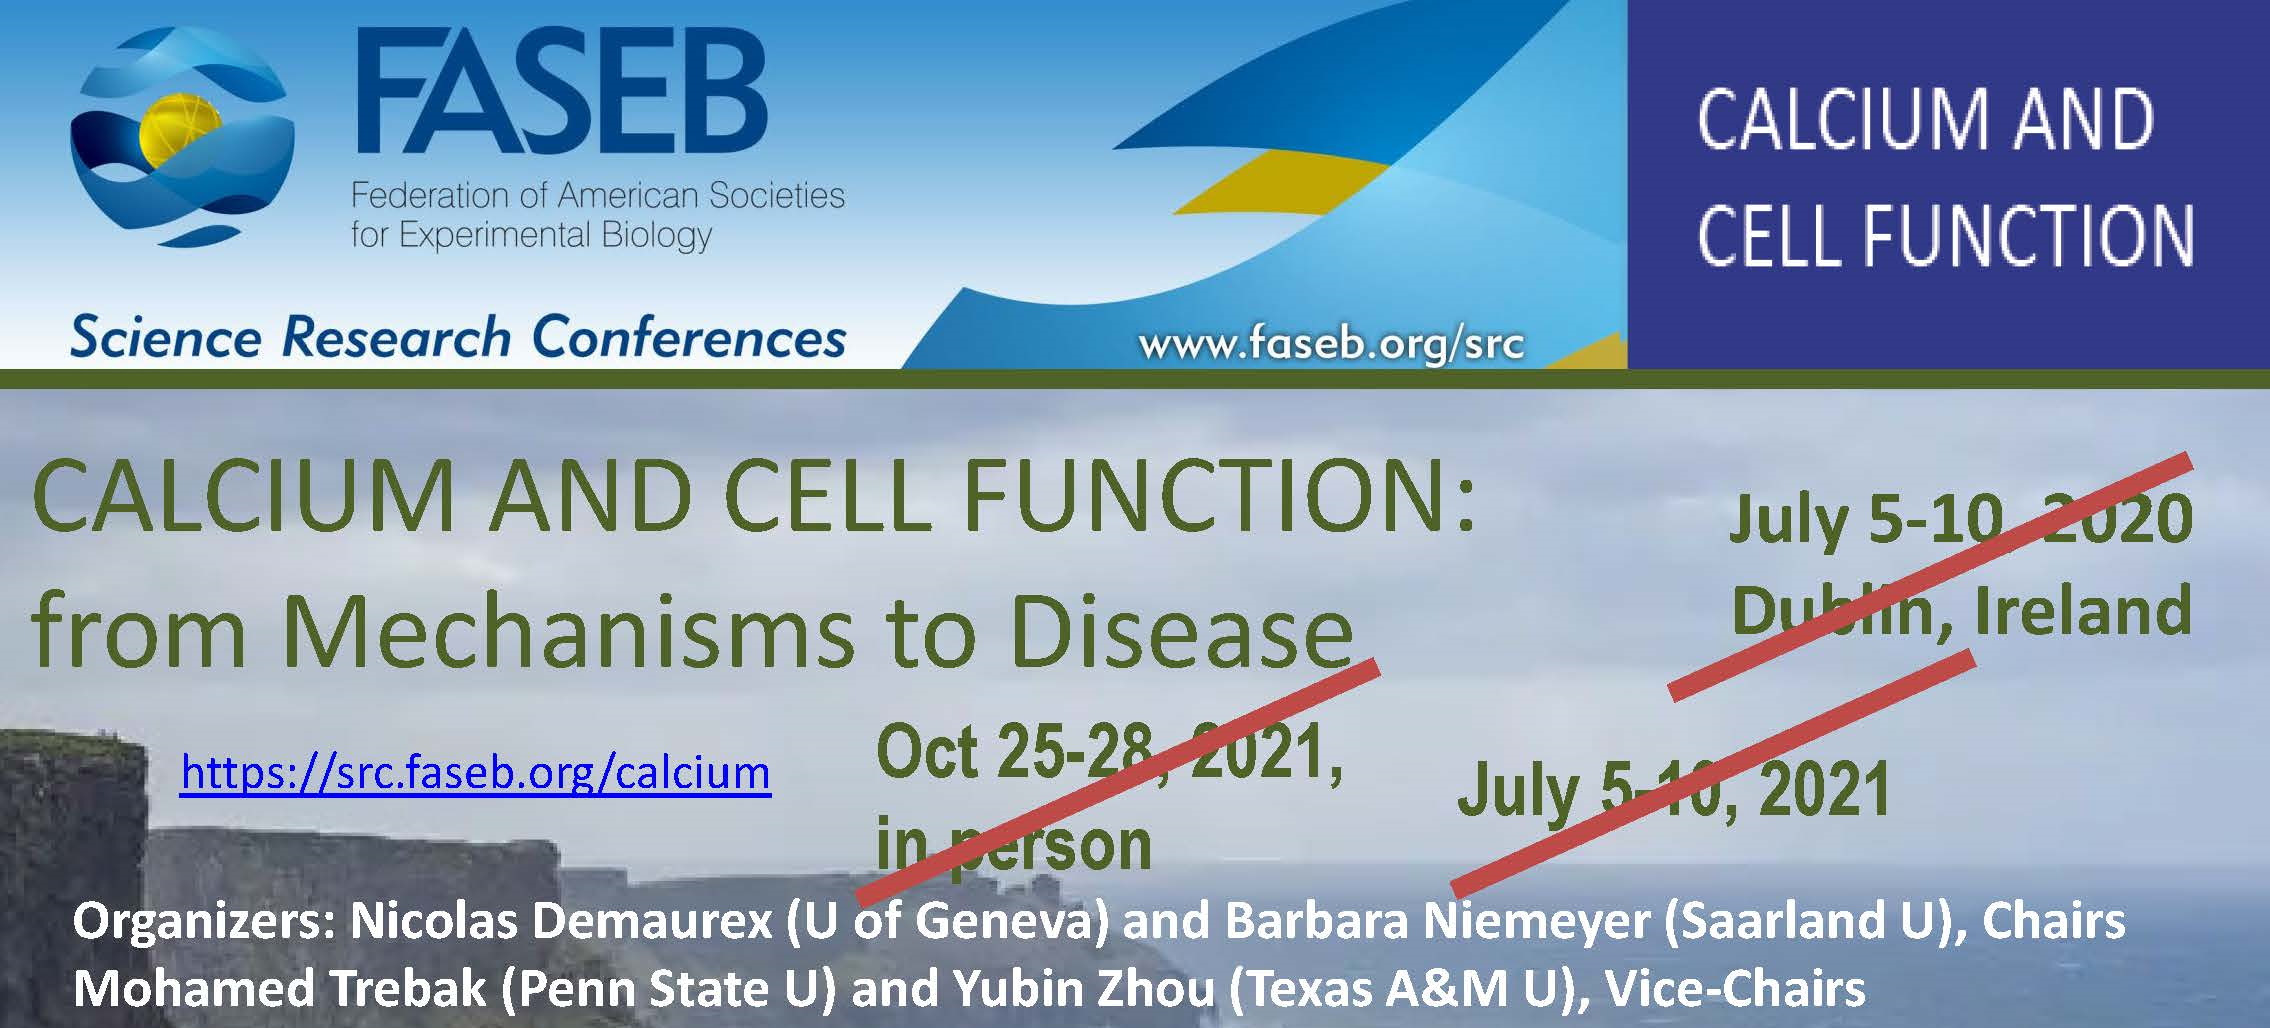 A meeting poster advertising the FASEB conference